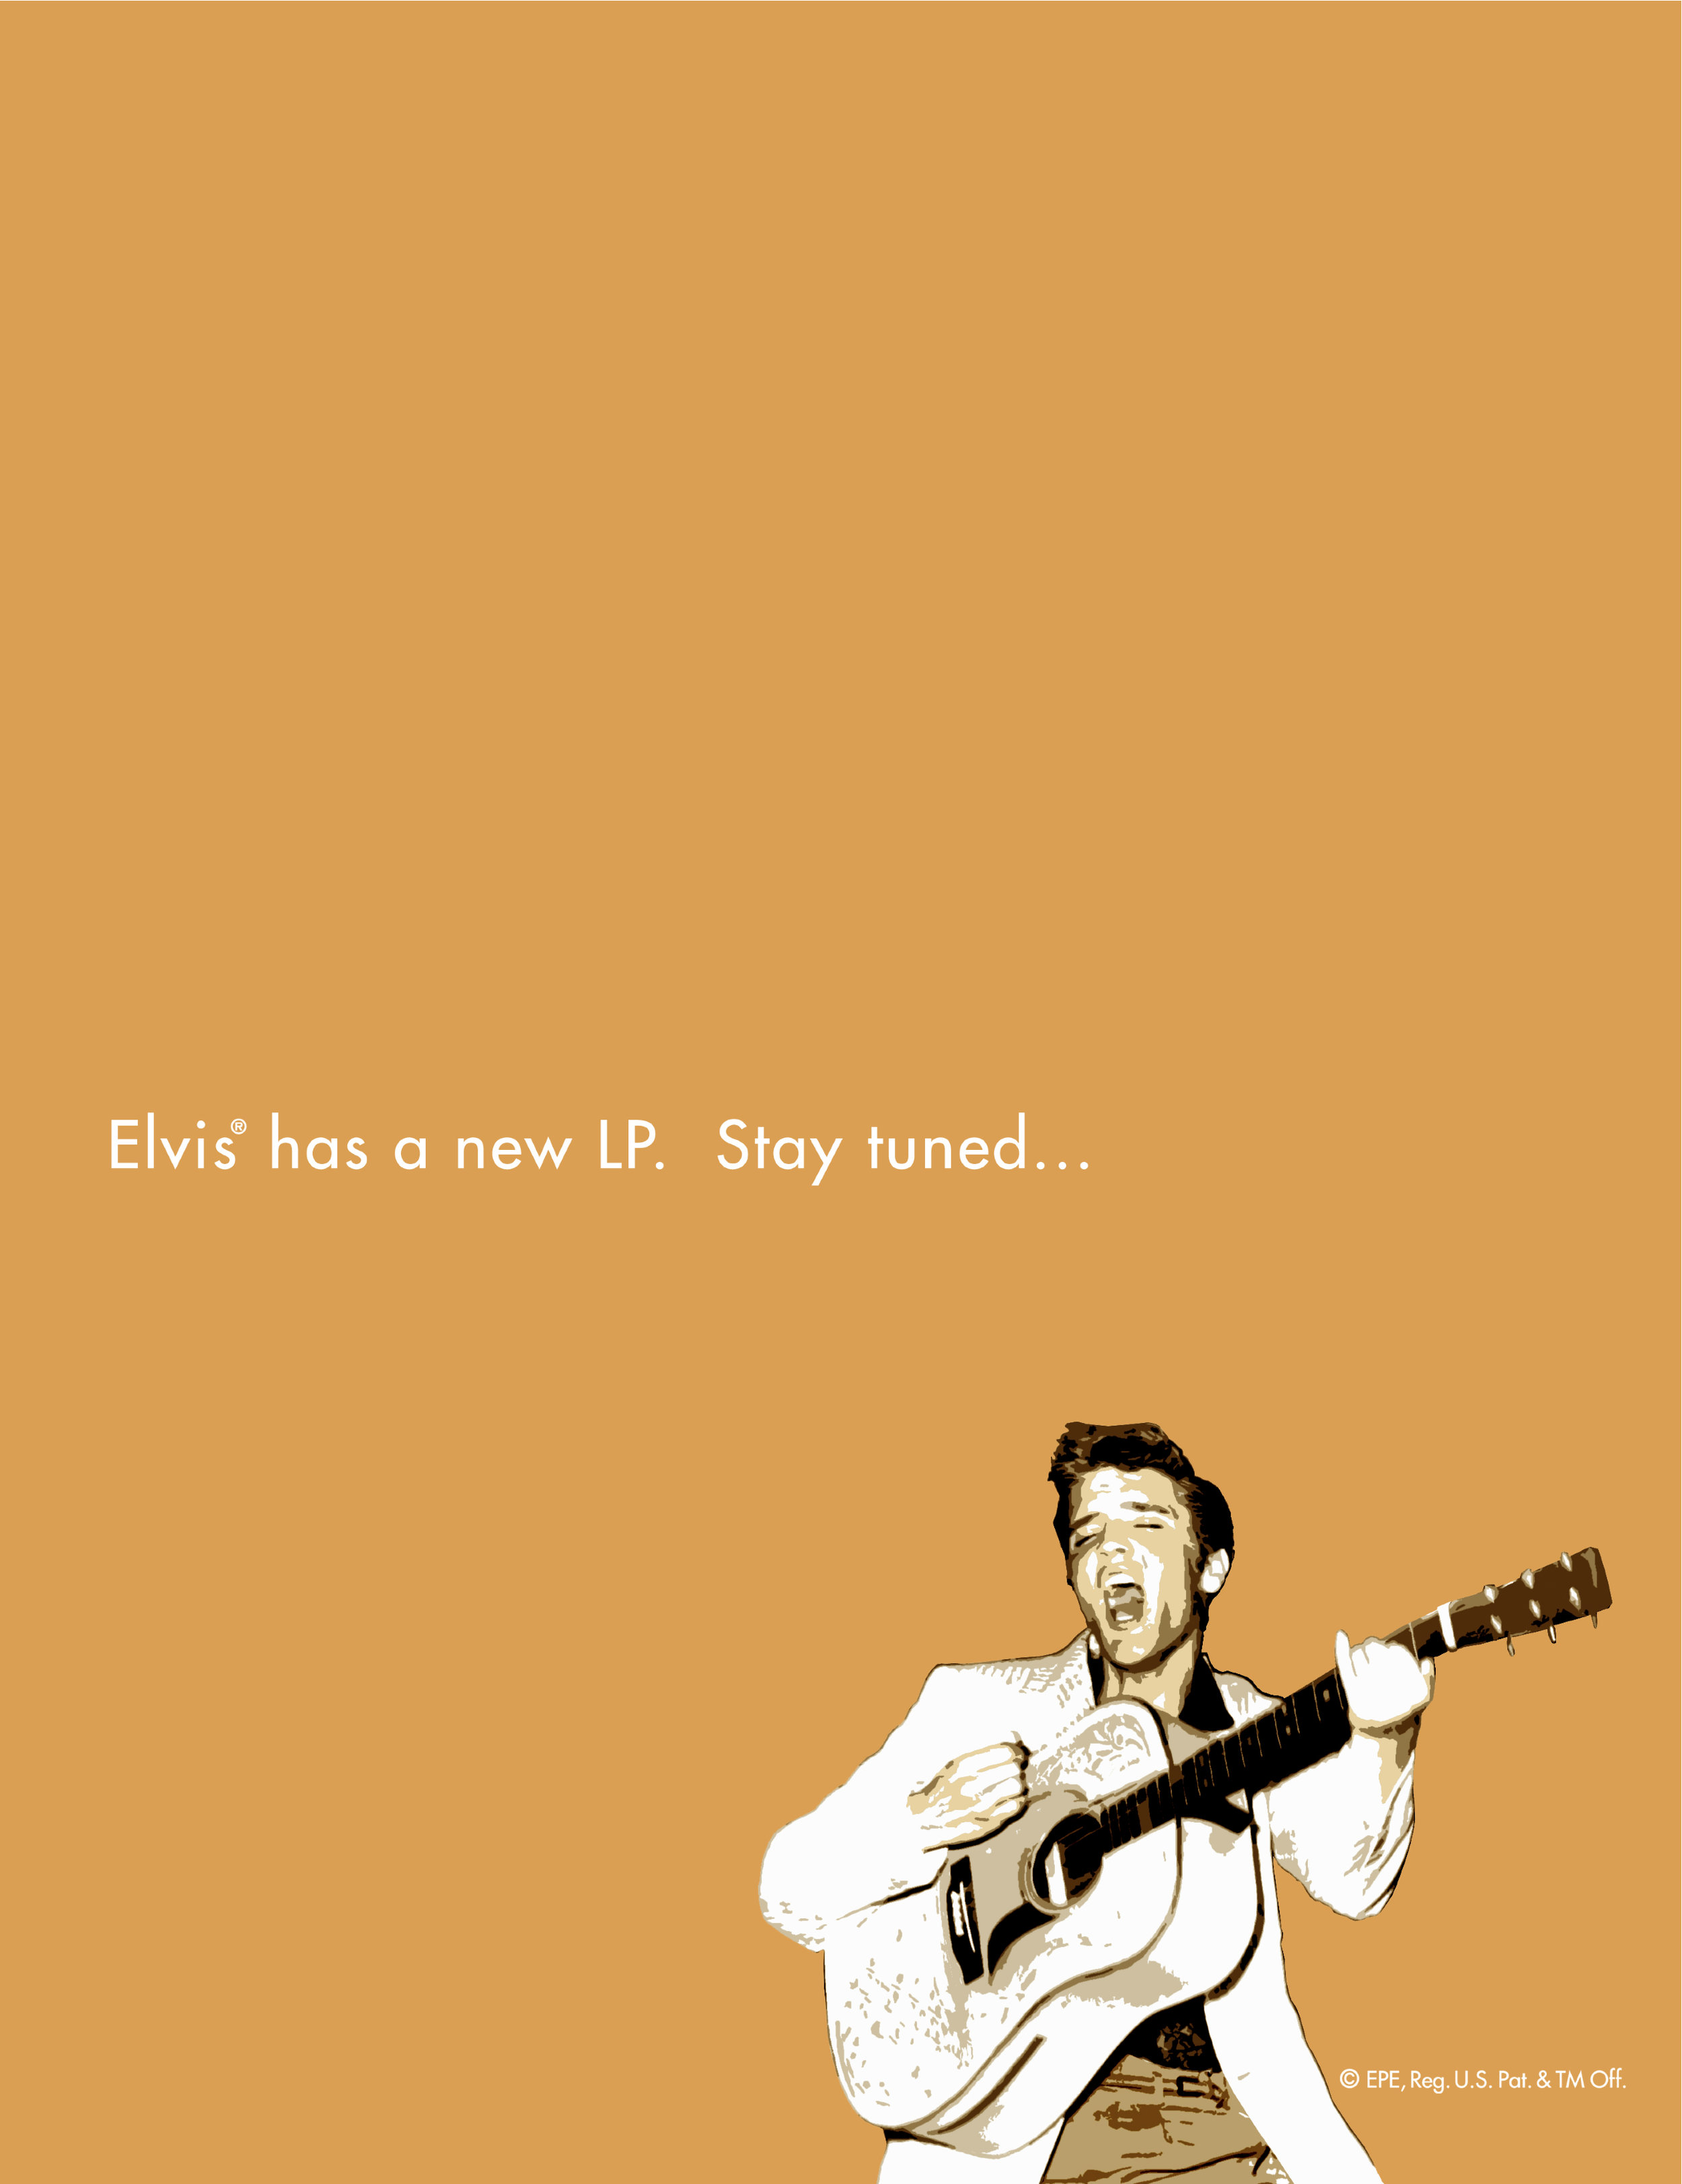  Elvis Presley Tennessee License Plate “teaser” full-page ad  Branding creative, design and copywriting by Chuck Mitchell 